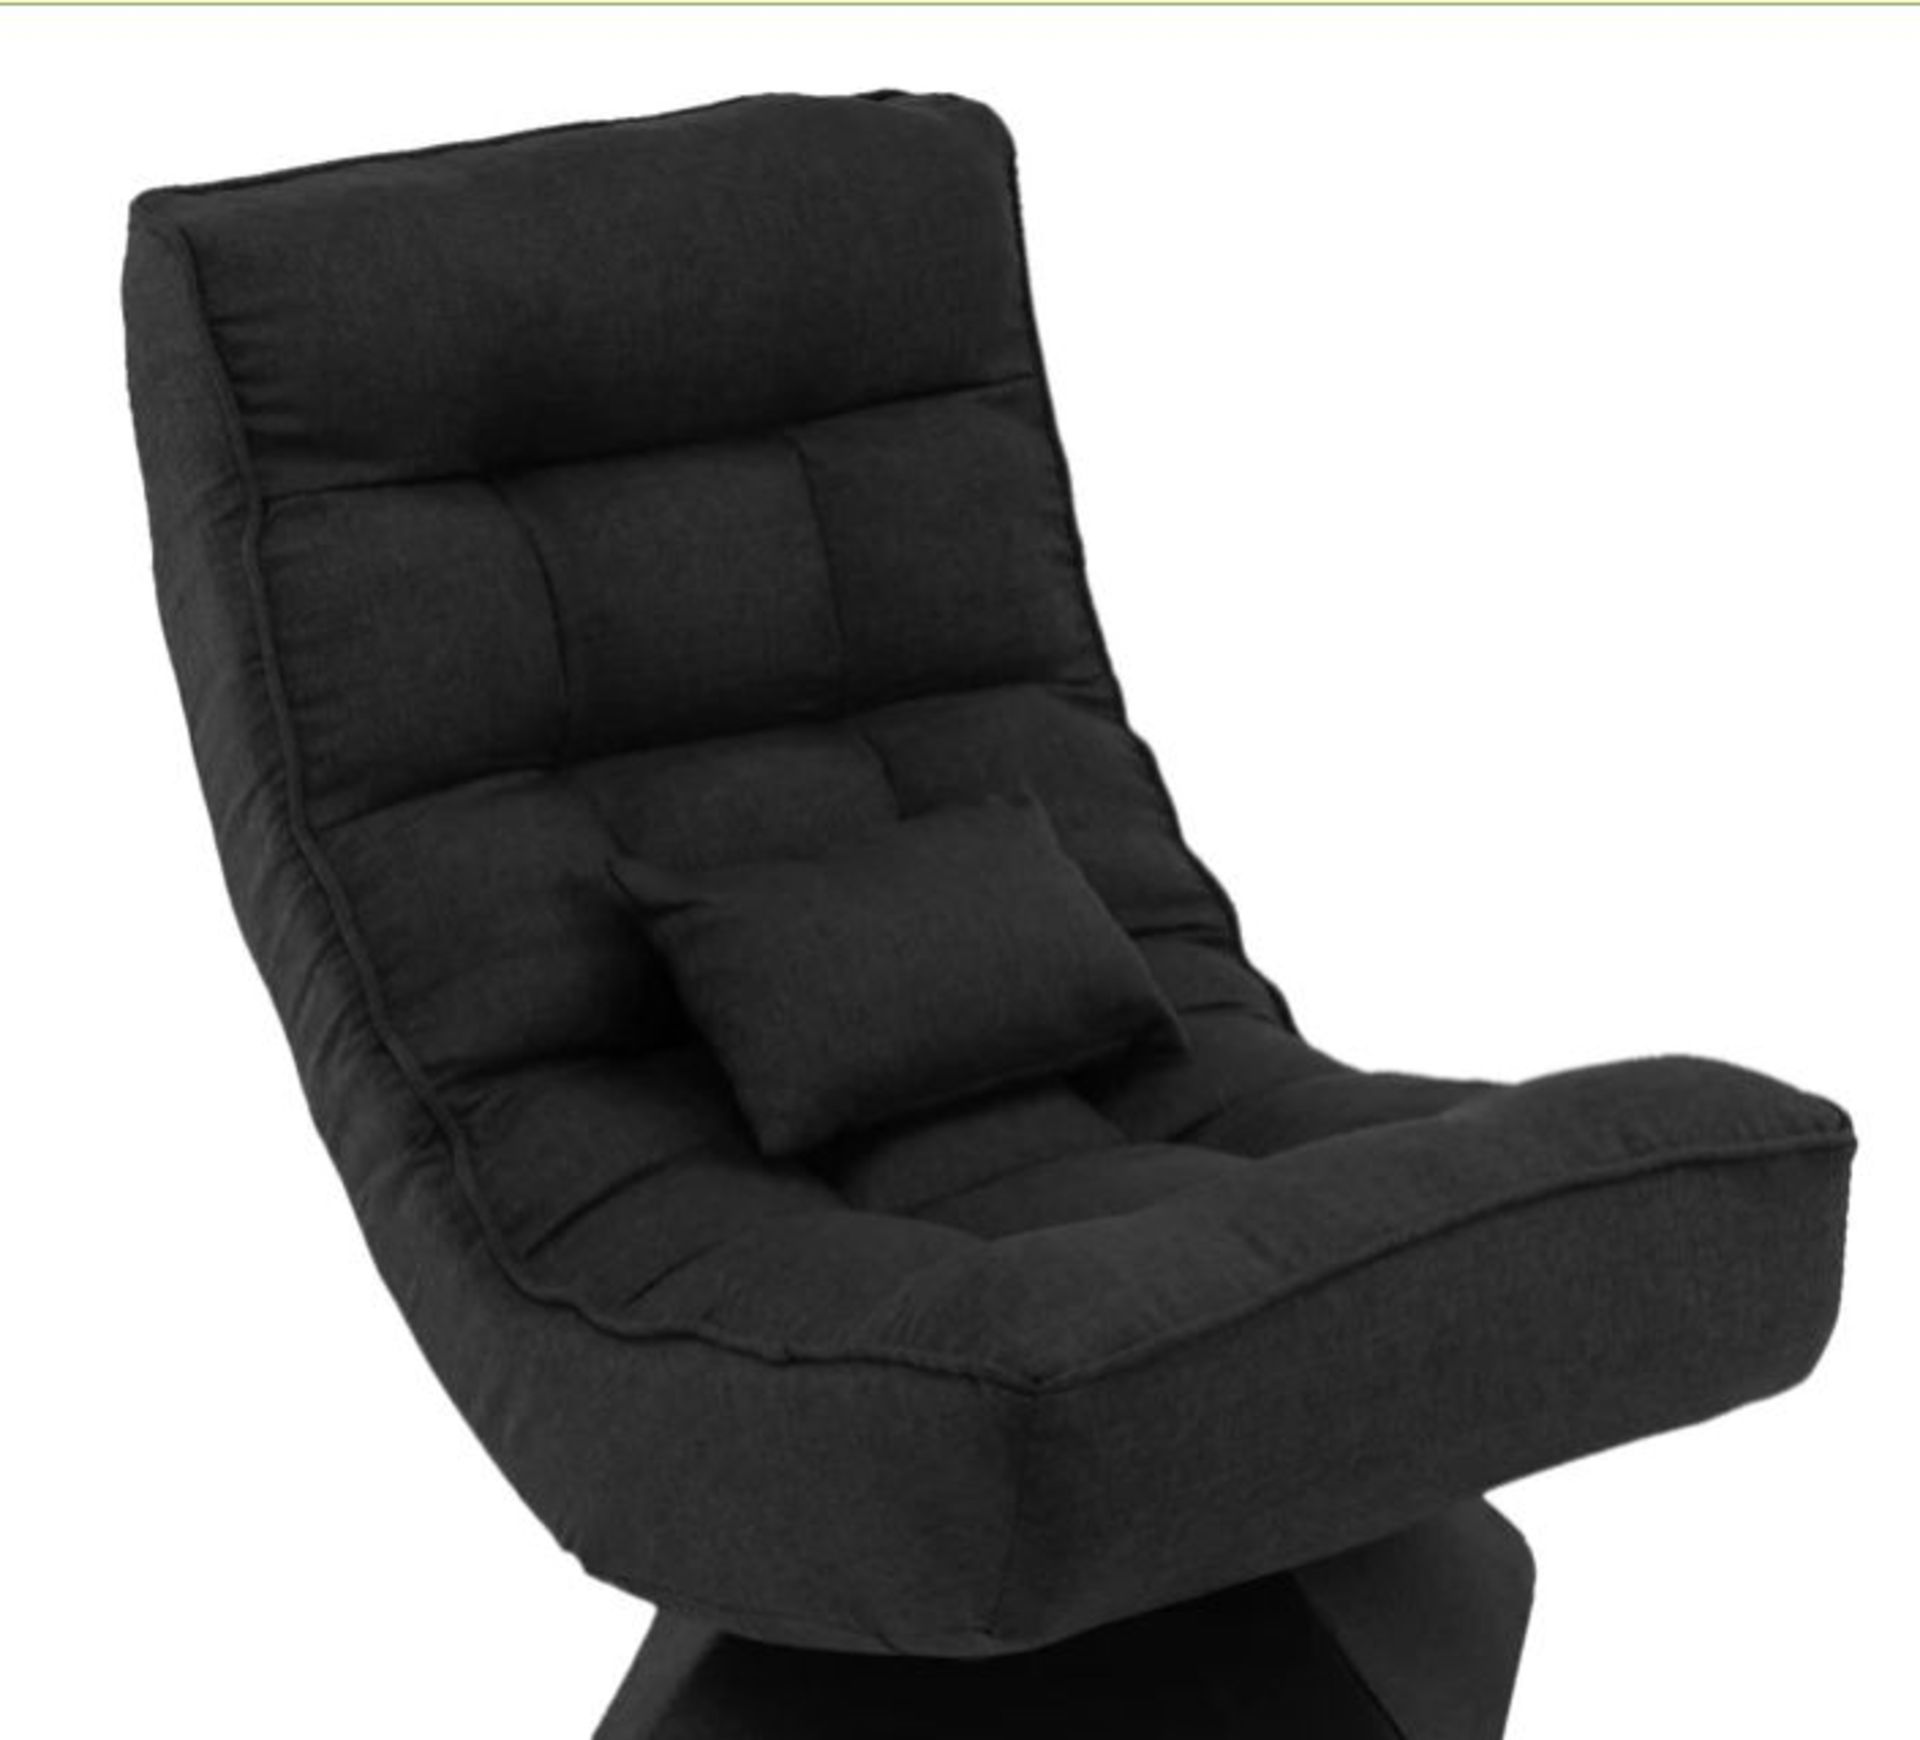 4-POSITION ADJUSTABLE FLOOR CHAIR WITH SWIVEL BASE-BLACK. - ER53. The comfy sofa chair is suitable